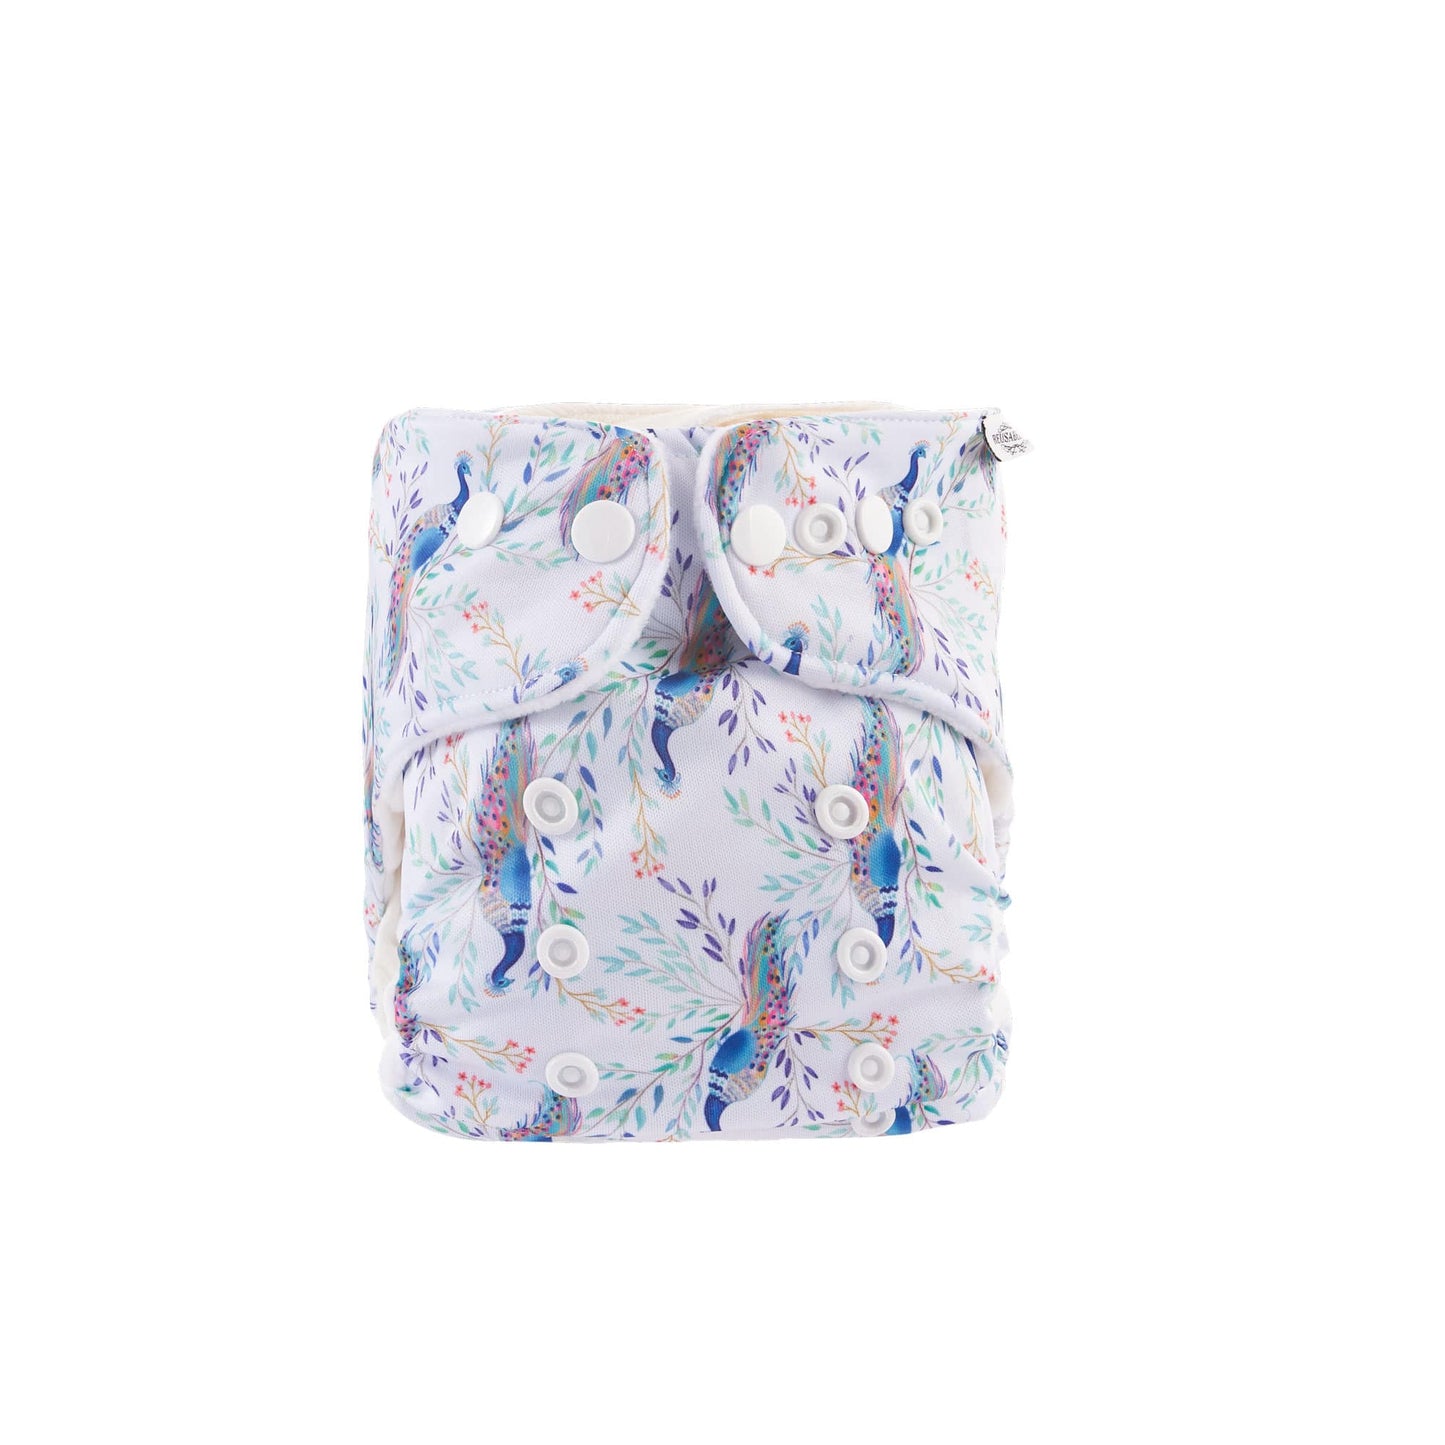 Reusable cloth nappy showing a peacock pattern.